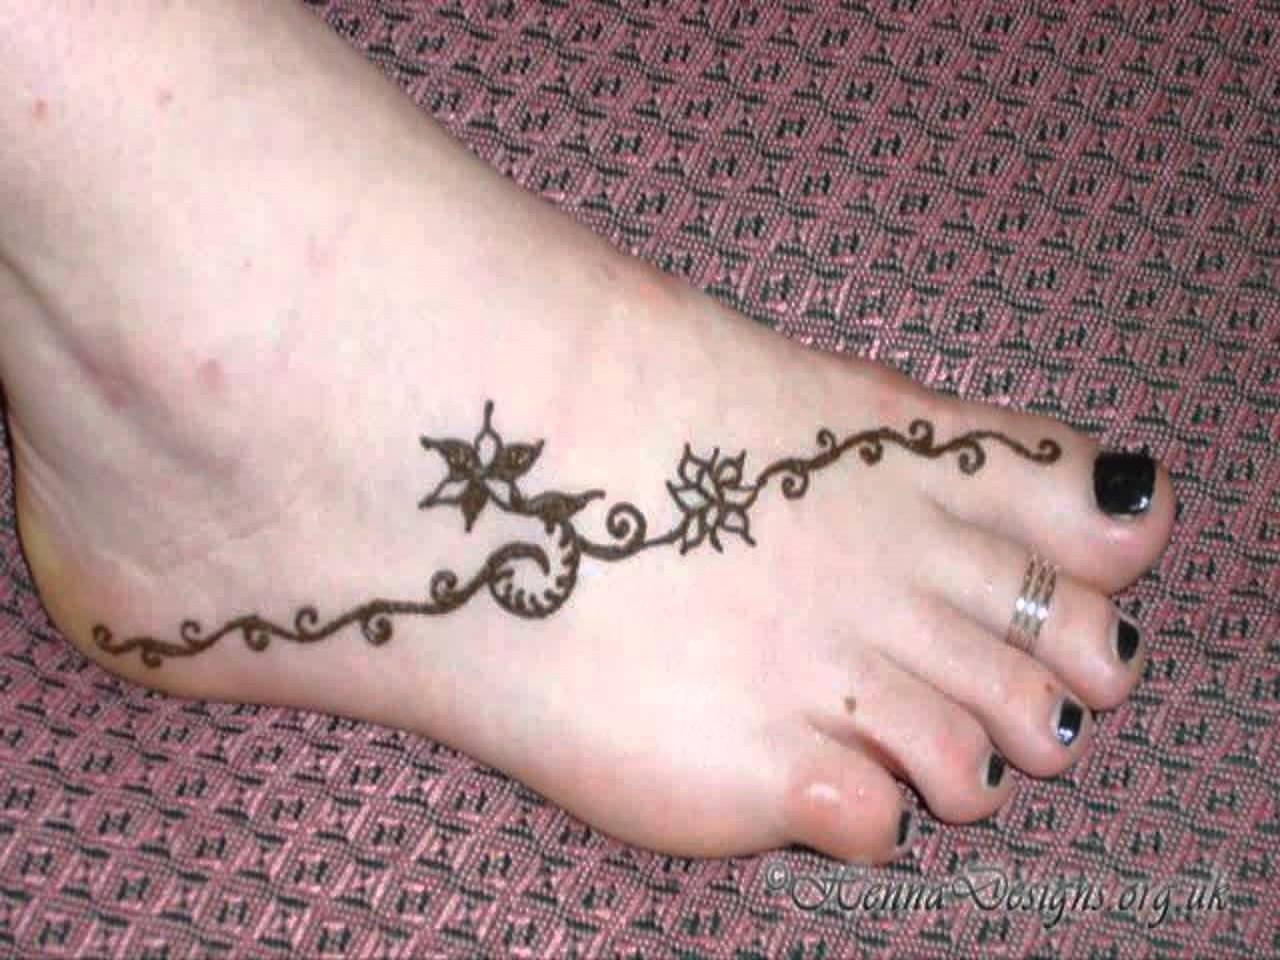 10 Perfect Tattoo Ideas For The Foot best henna tattoo foot design ideas 2014 youtube 2022